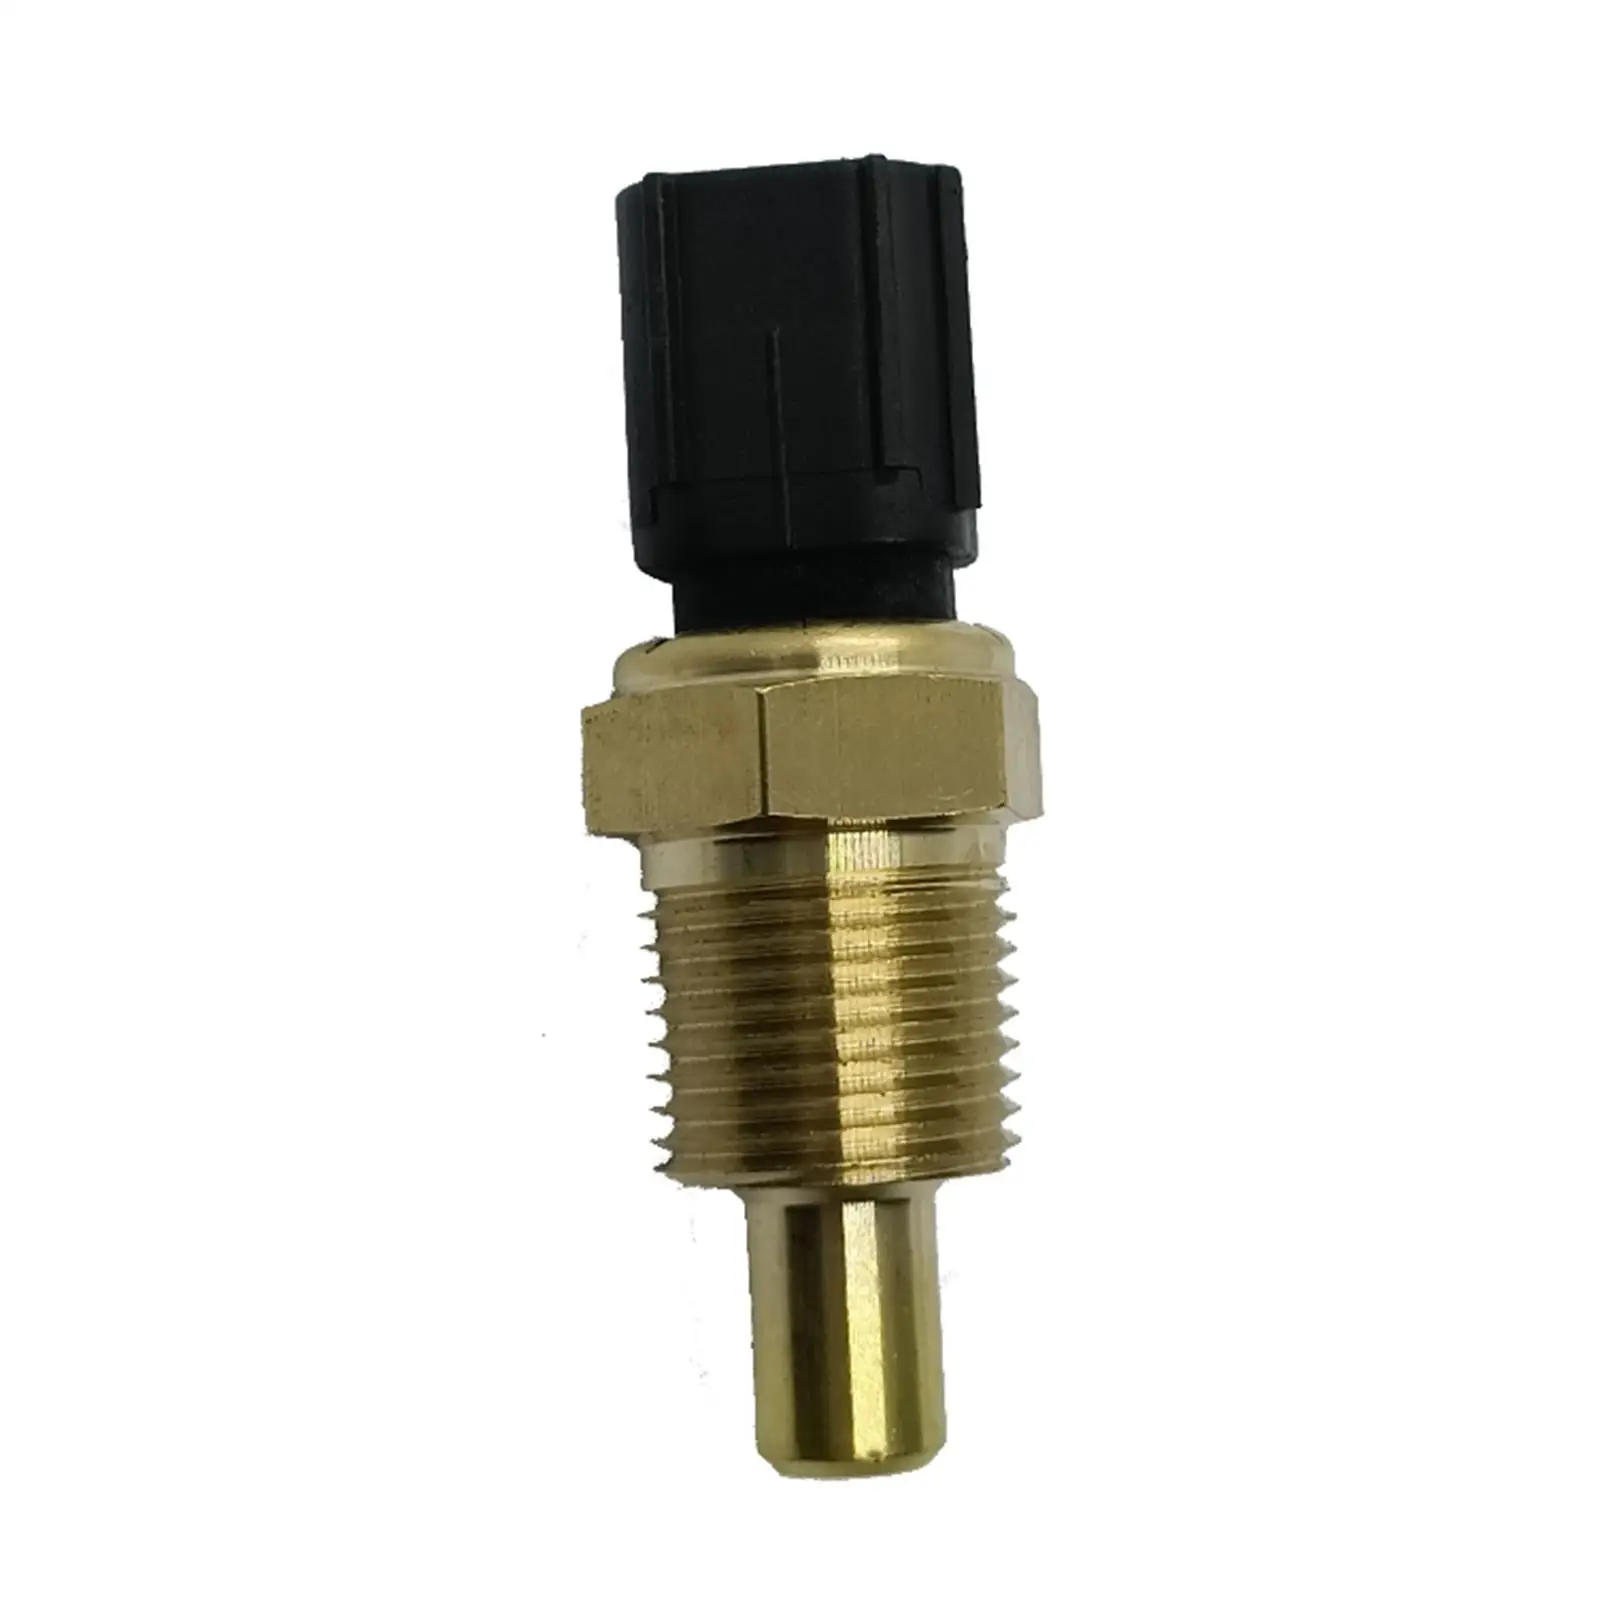 Coolant Temperature Sensor 5269-870Ab 13621486698 2132153 5269870Ab 89053233 WT5066 712545 140317 for Plymouth for for Chrysler